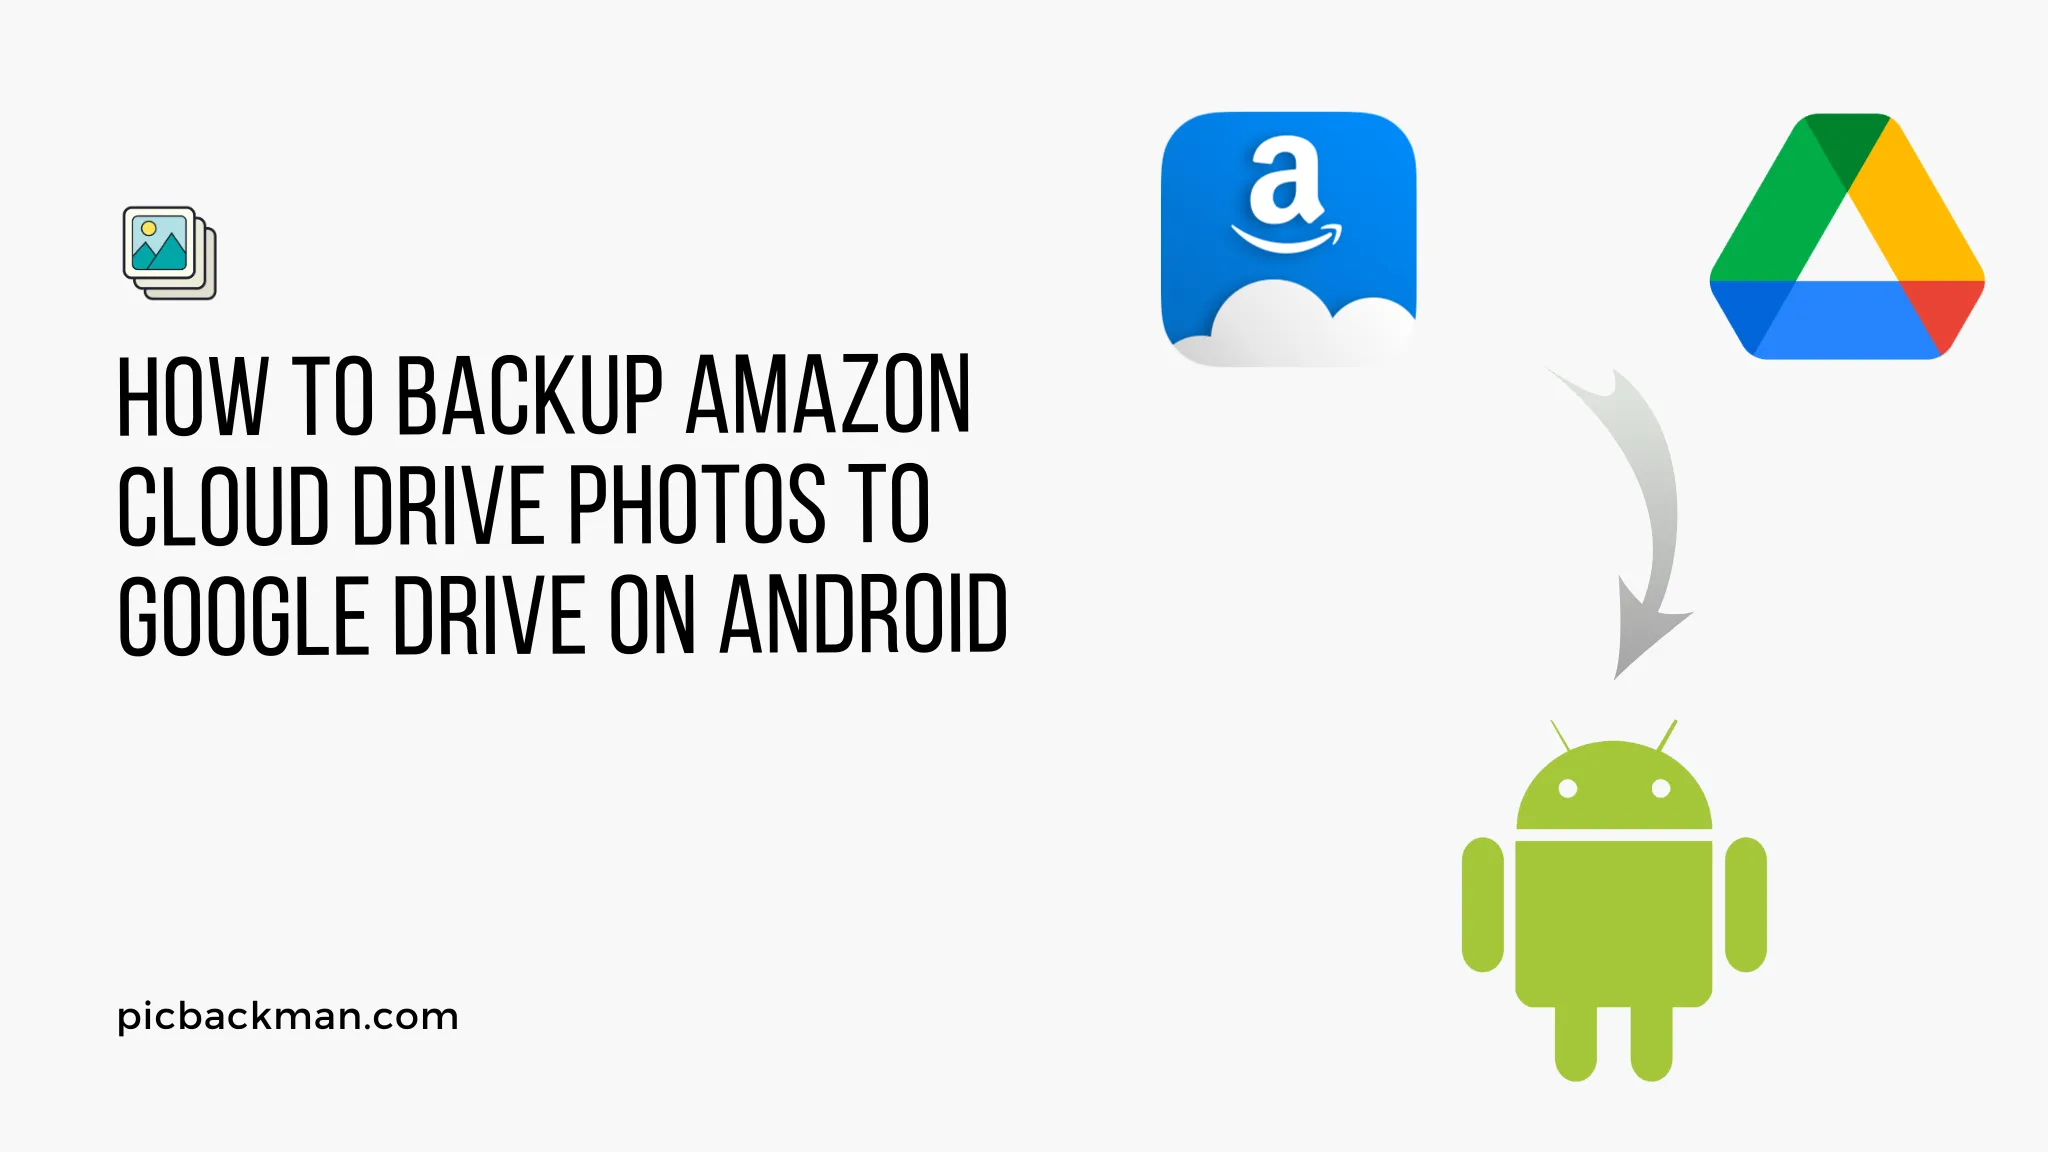 How to Backup Amazon Cloud Drive Photos to Google Drive on Android